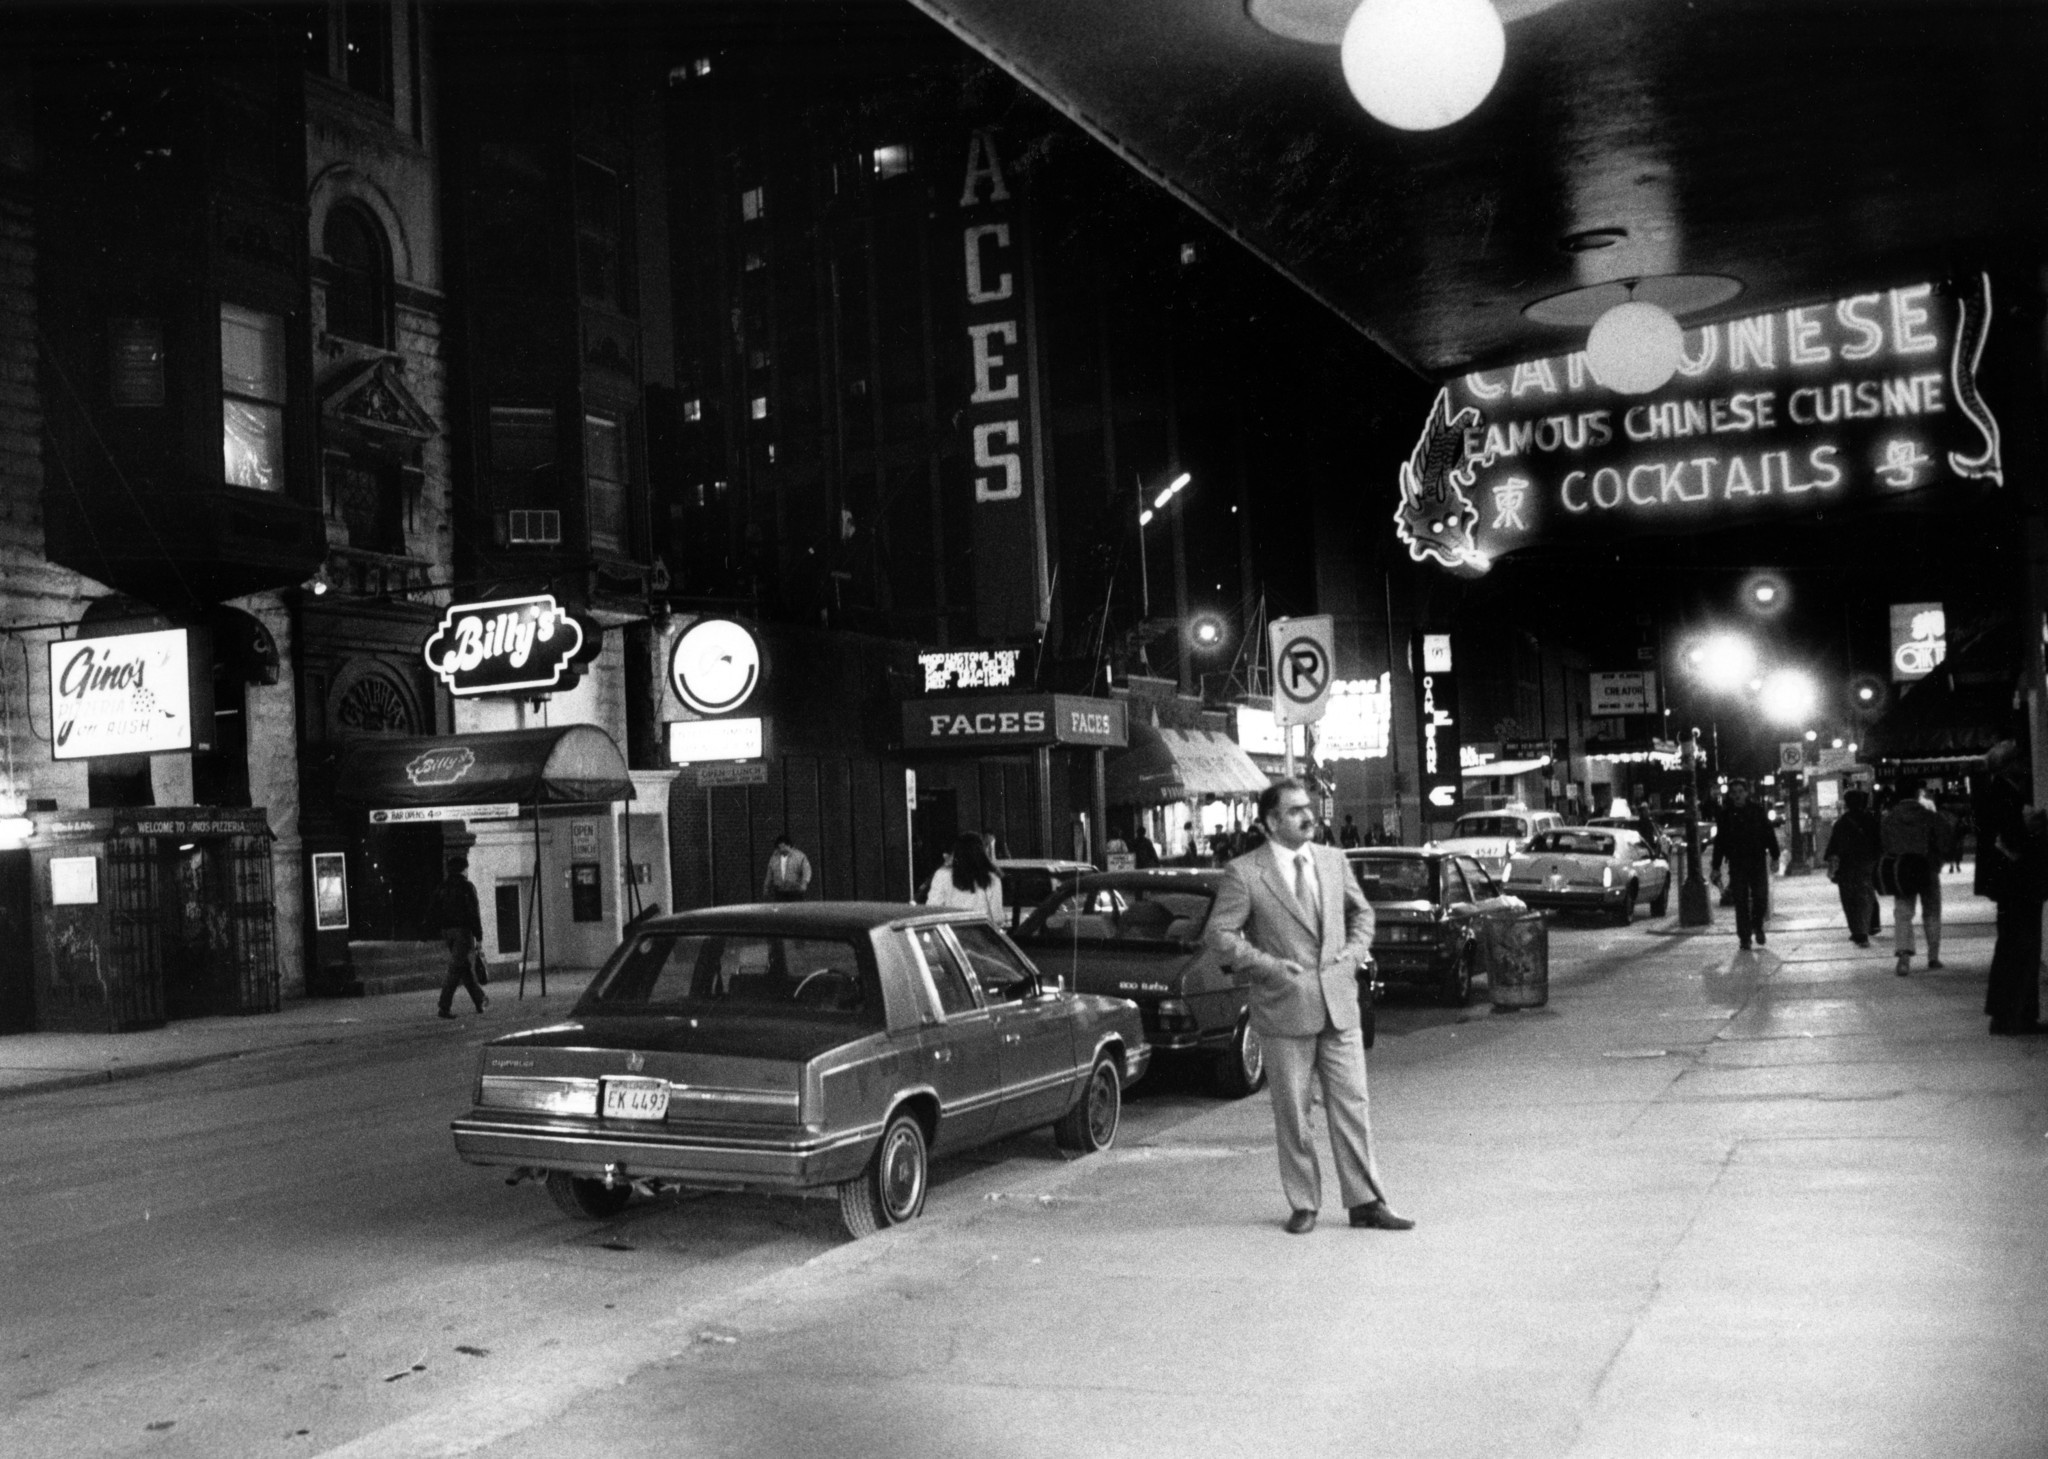 Rush Street: Memories of the bar and club scene on Chicago's "street of